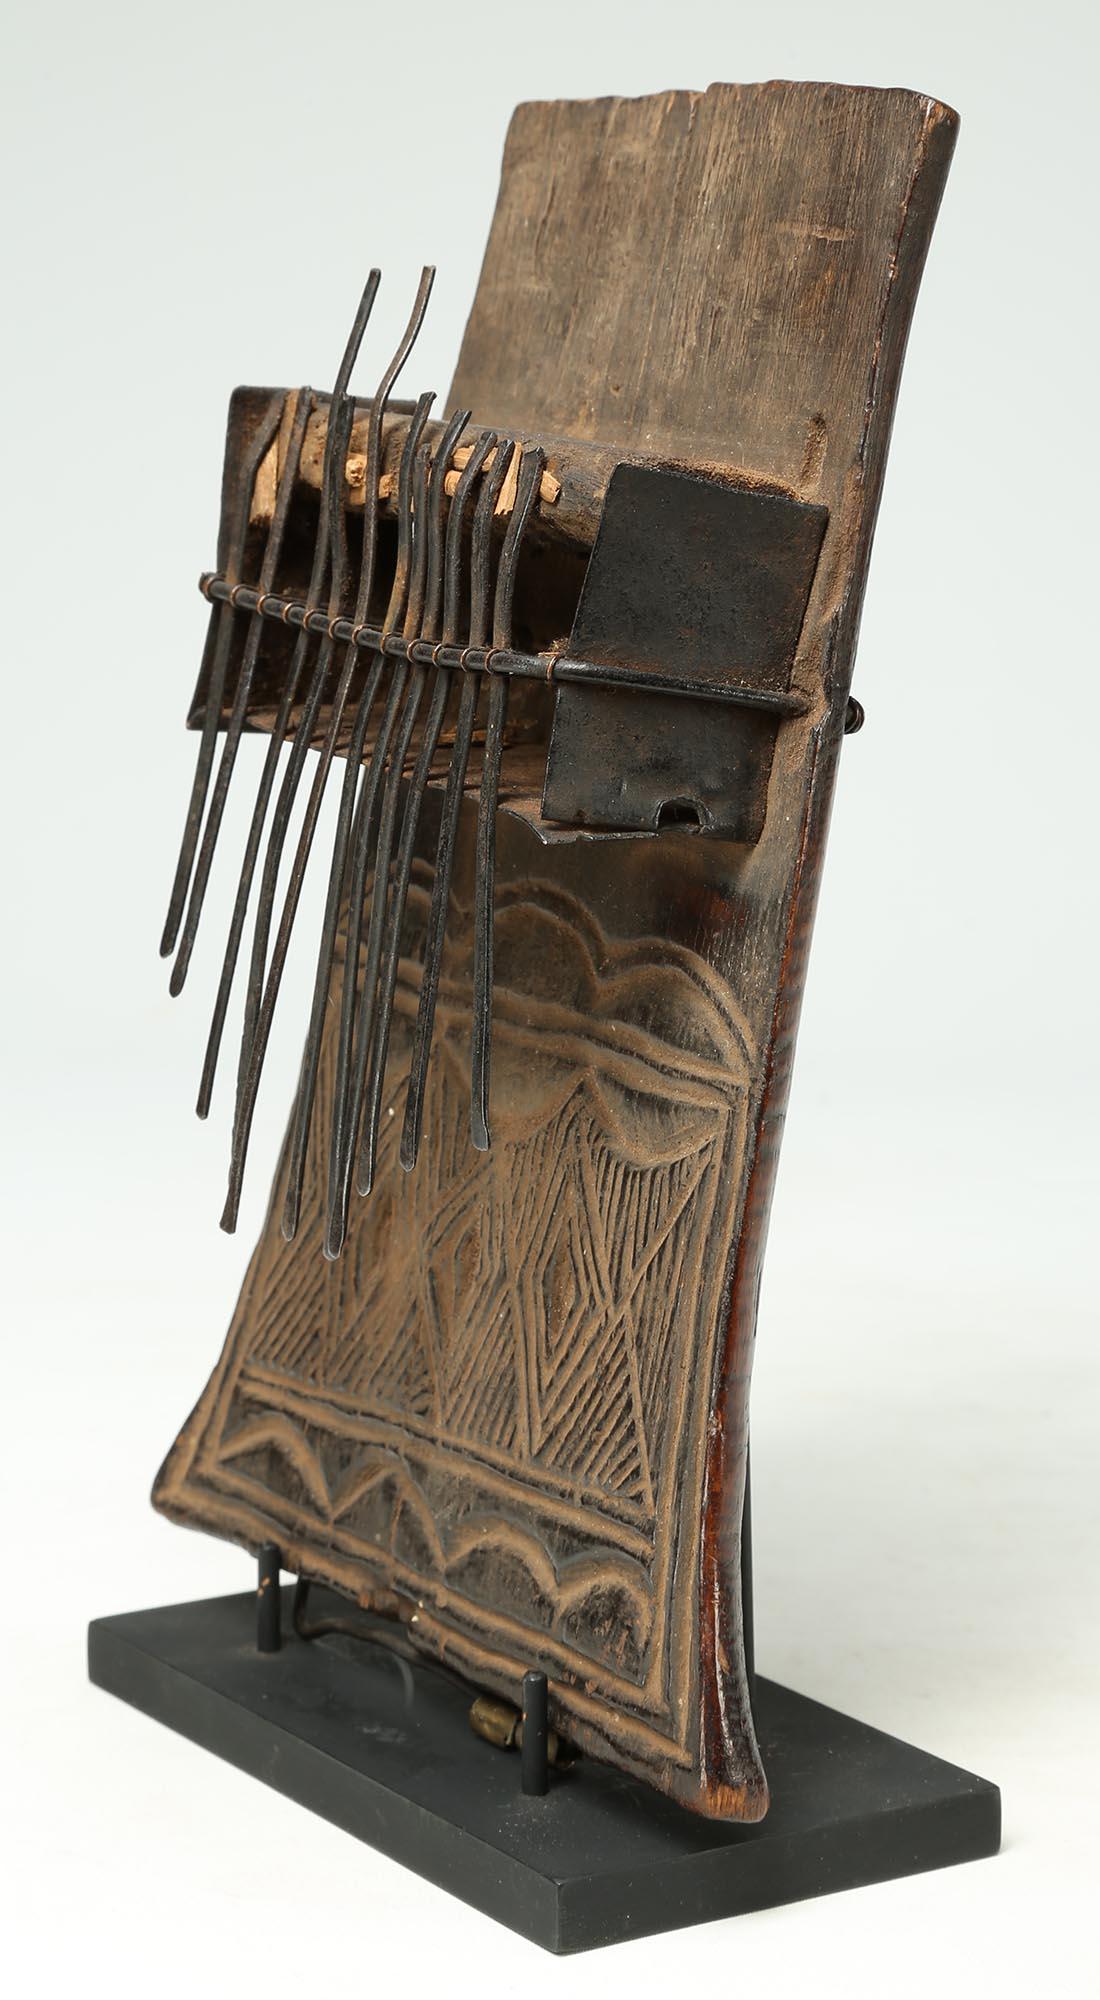 Congolese Mbira or Sanza Congo Early 20th Century African Tribal Musical Instrument